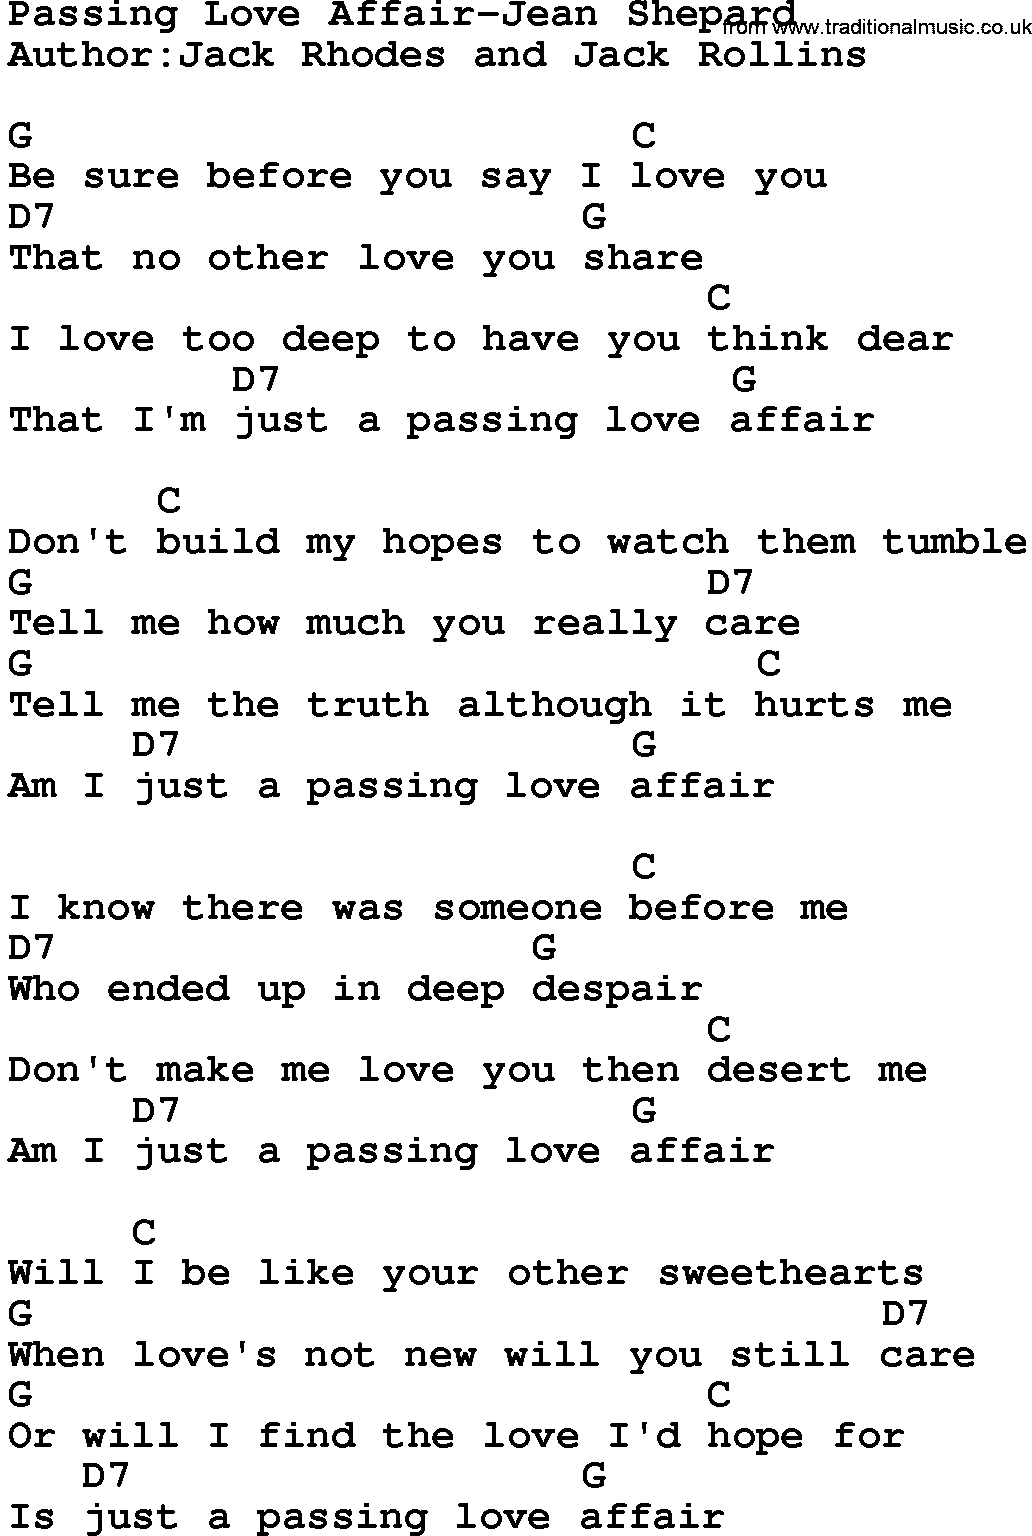 Country music song: Passing Love Affair-Jean Shepard lyrics and chords